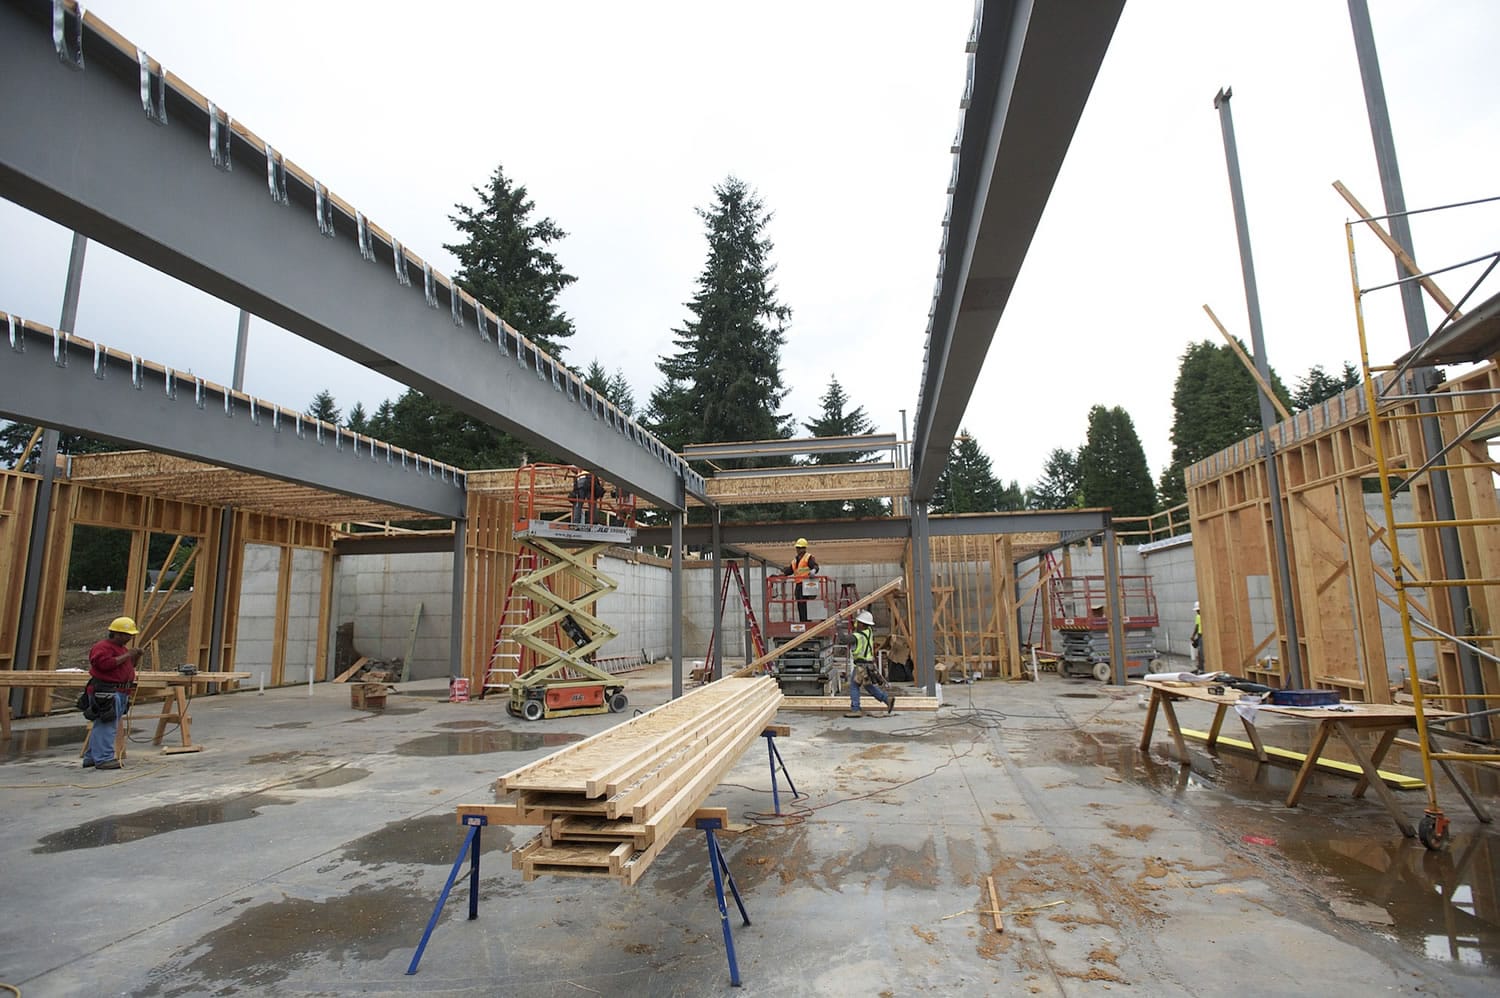 Construction is well underway on a new Sikh temple - called a gurudwara - in east Vancouver that's expected to open in March 2015.